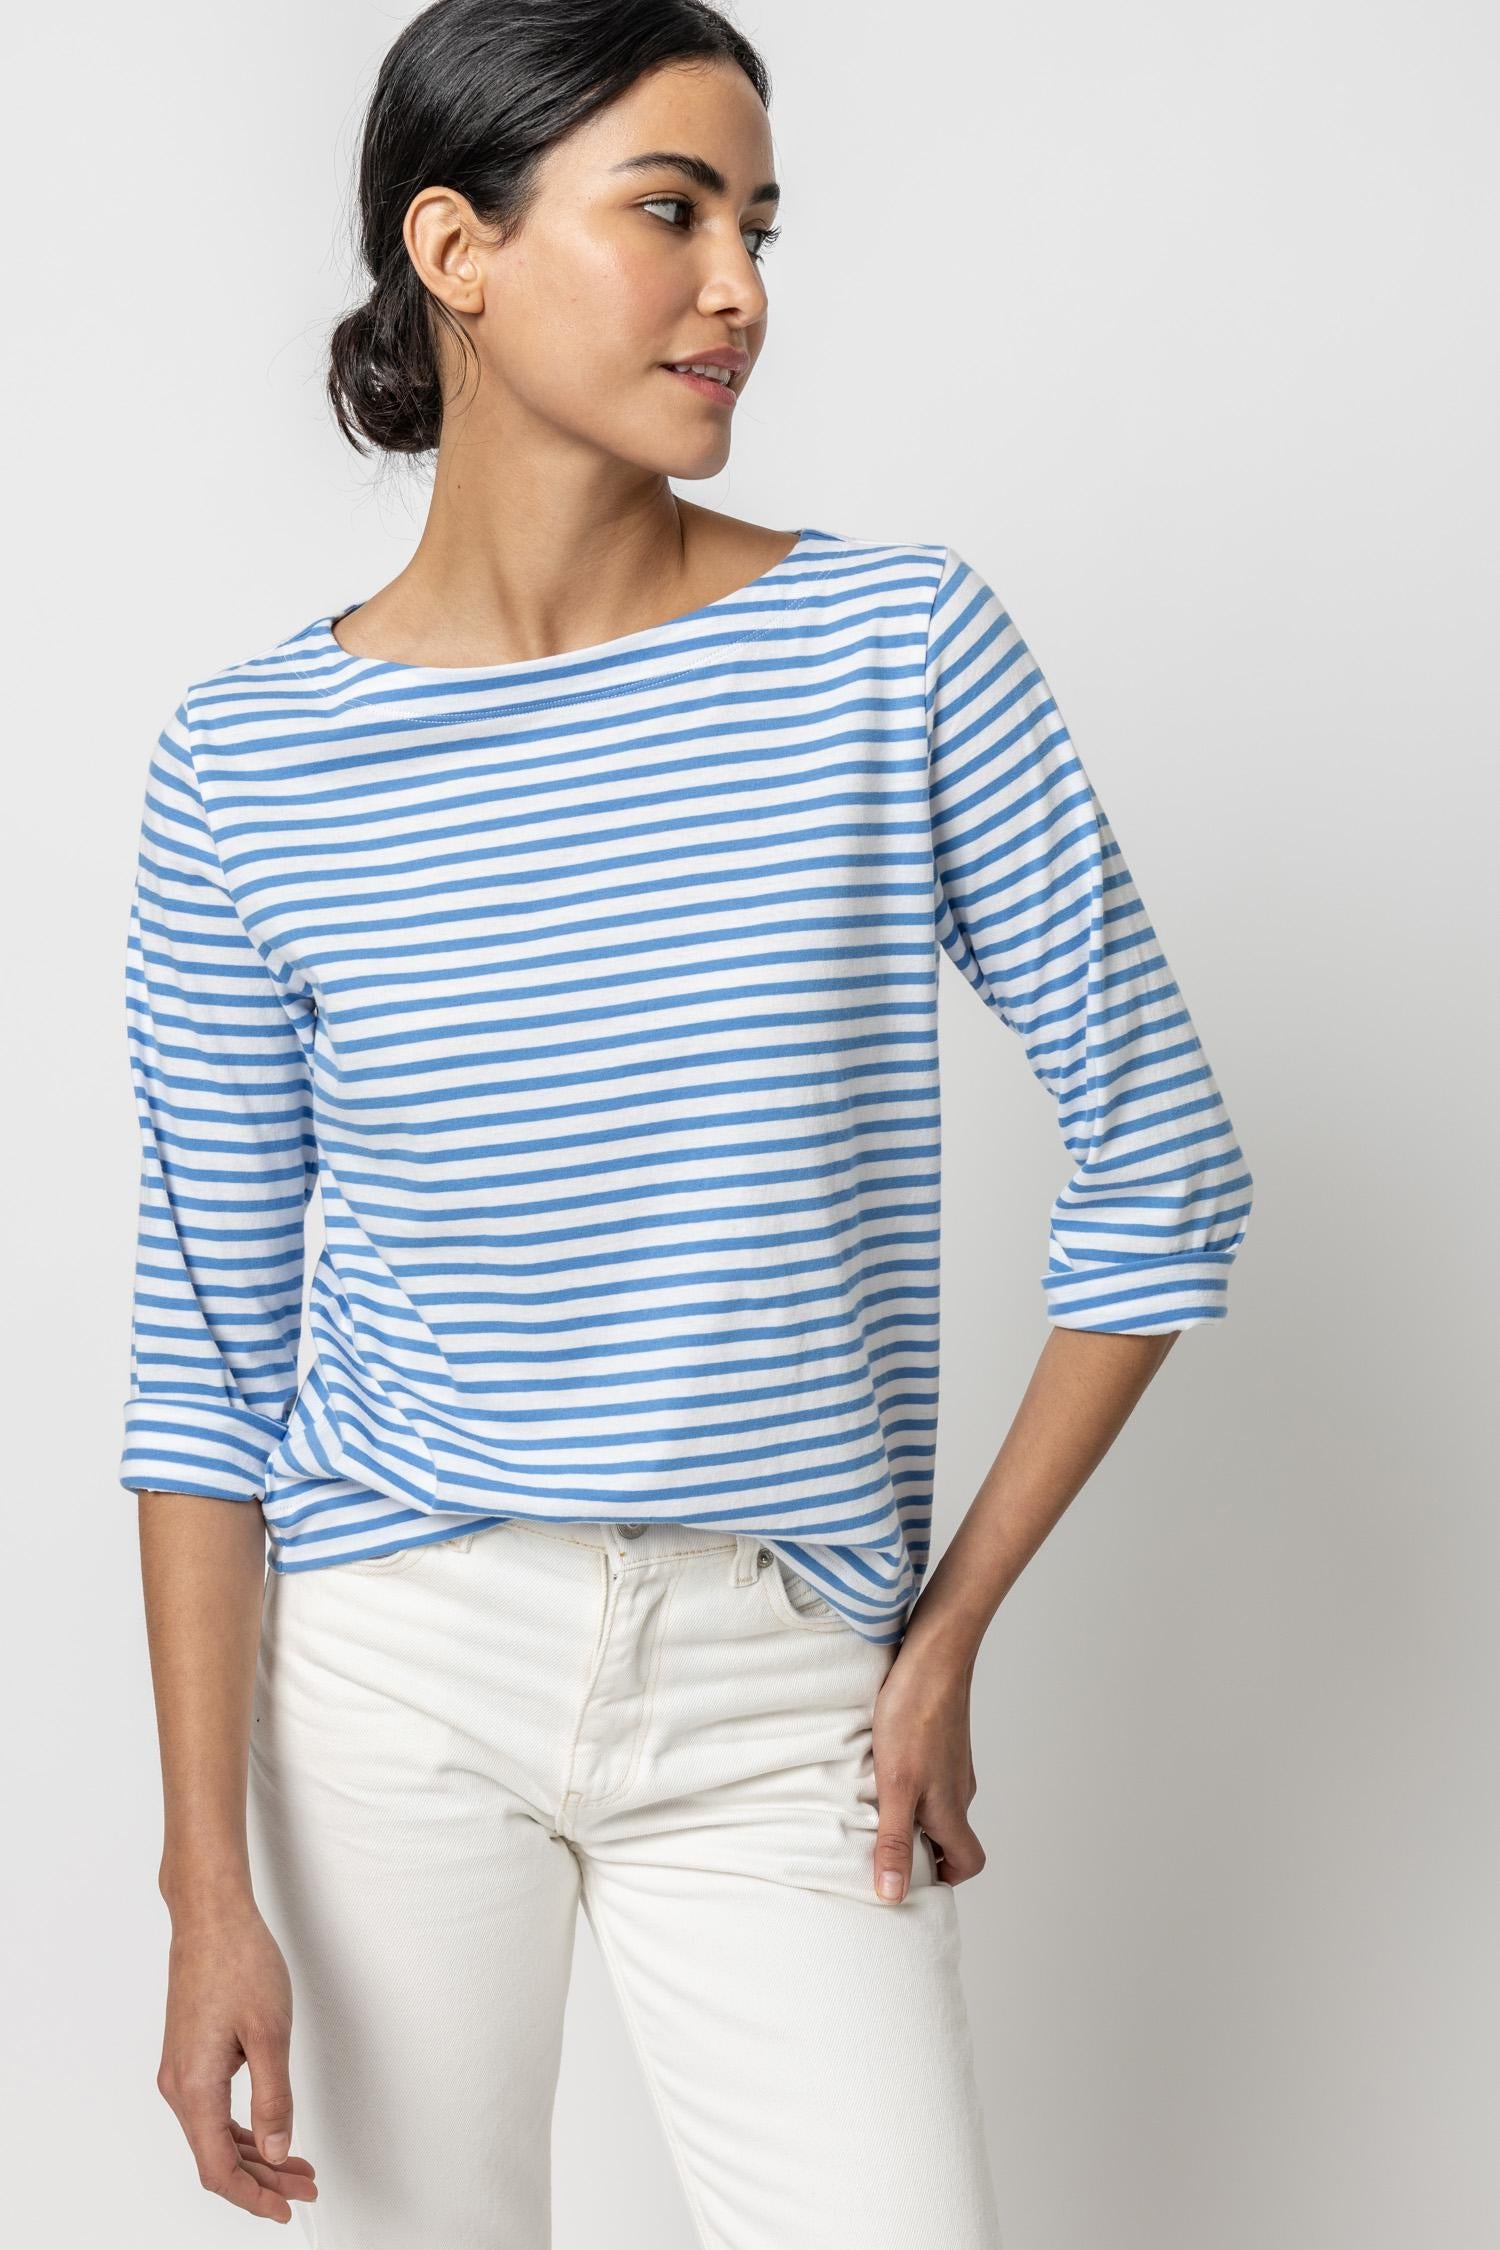 Lilla P 3/4 Sleeve Boatneck - Marina Stripe Clothing - Tops - Shirts - LS Knits by Lilla P | Grace the Boutique